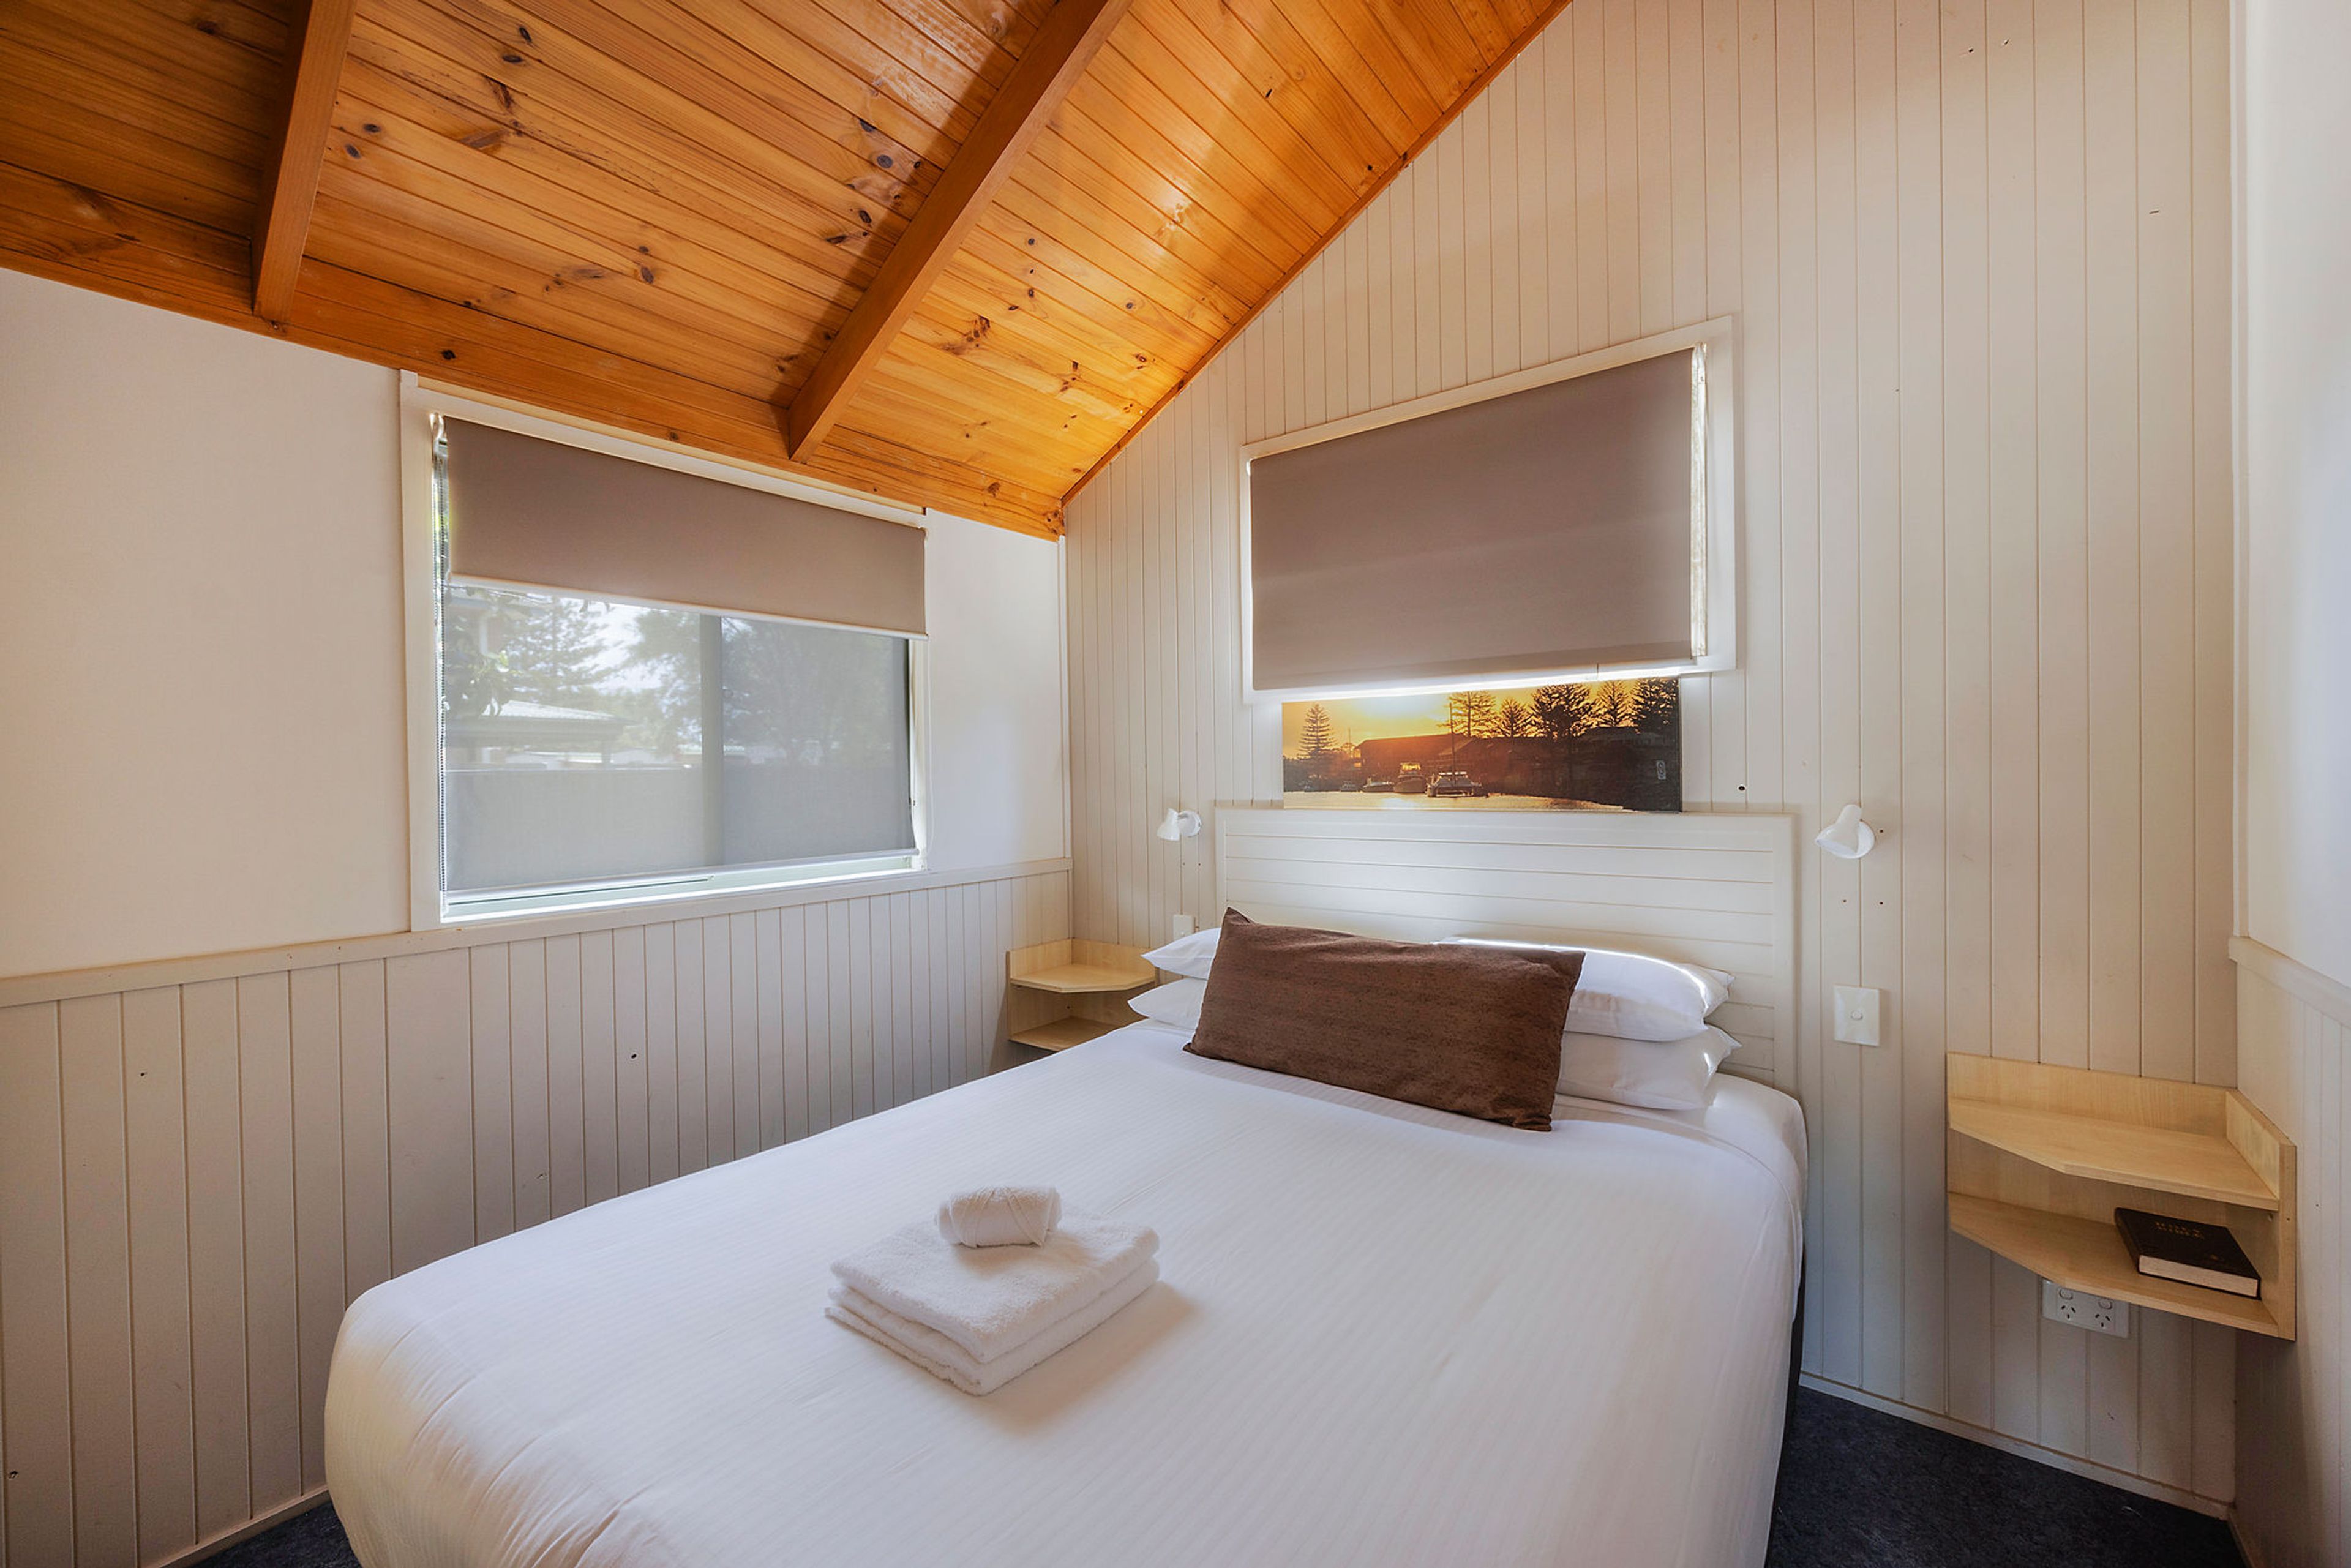 Tuncurry - Deluxe Cabin - Sleeps 6 - Main Bed